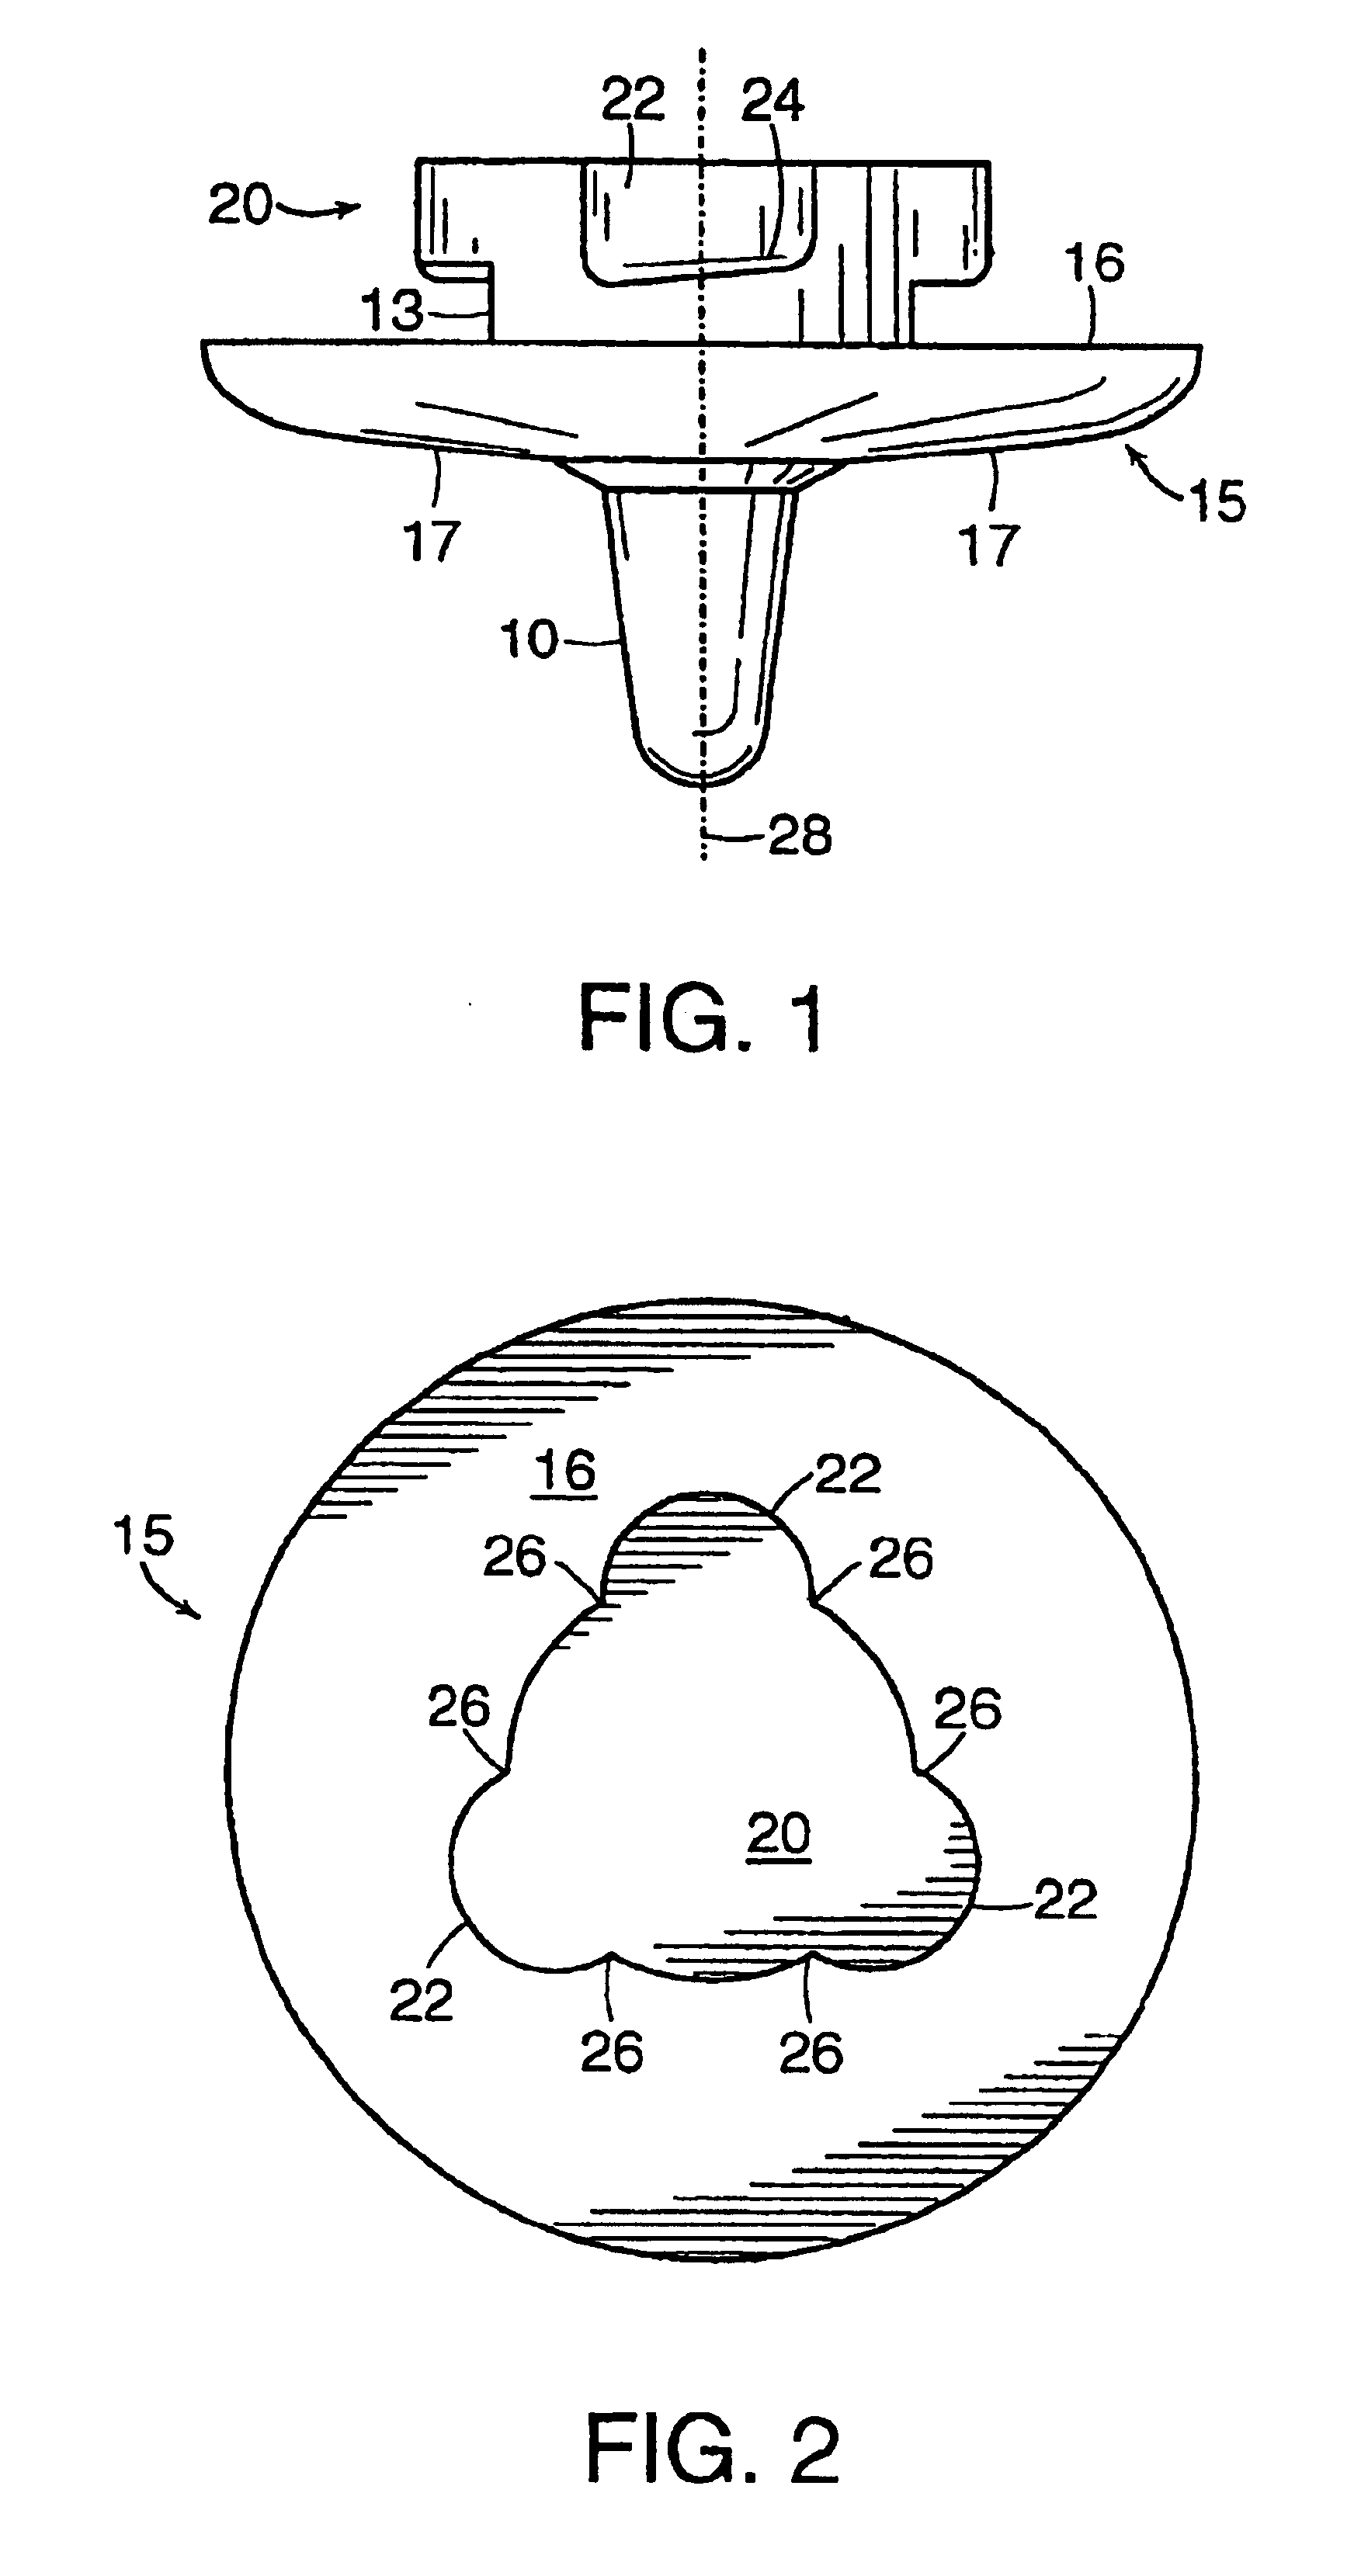 Method of using removable cleat system